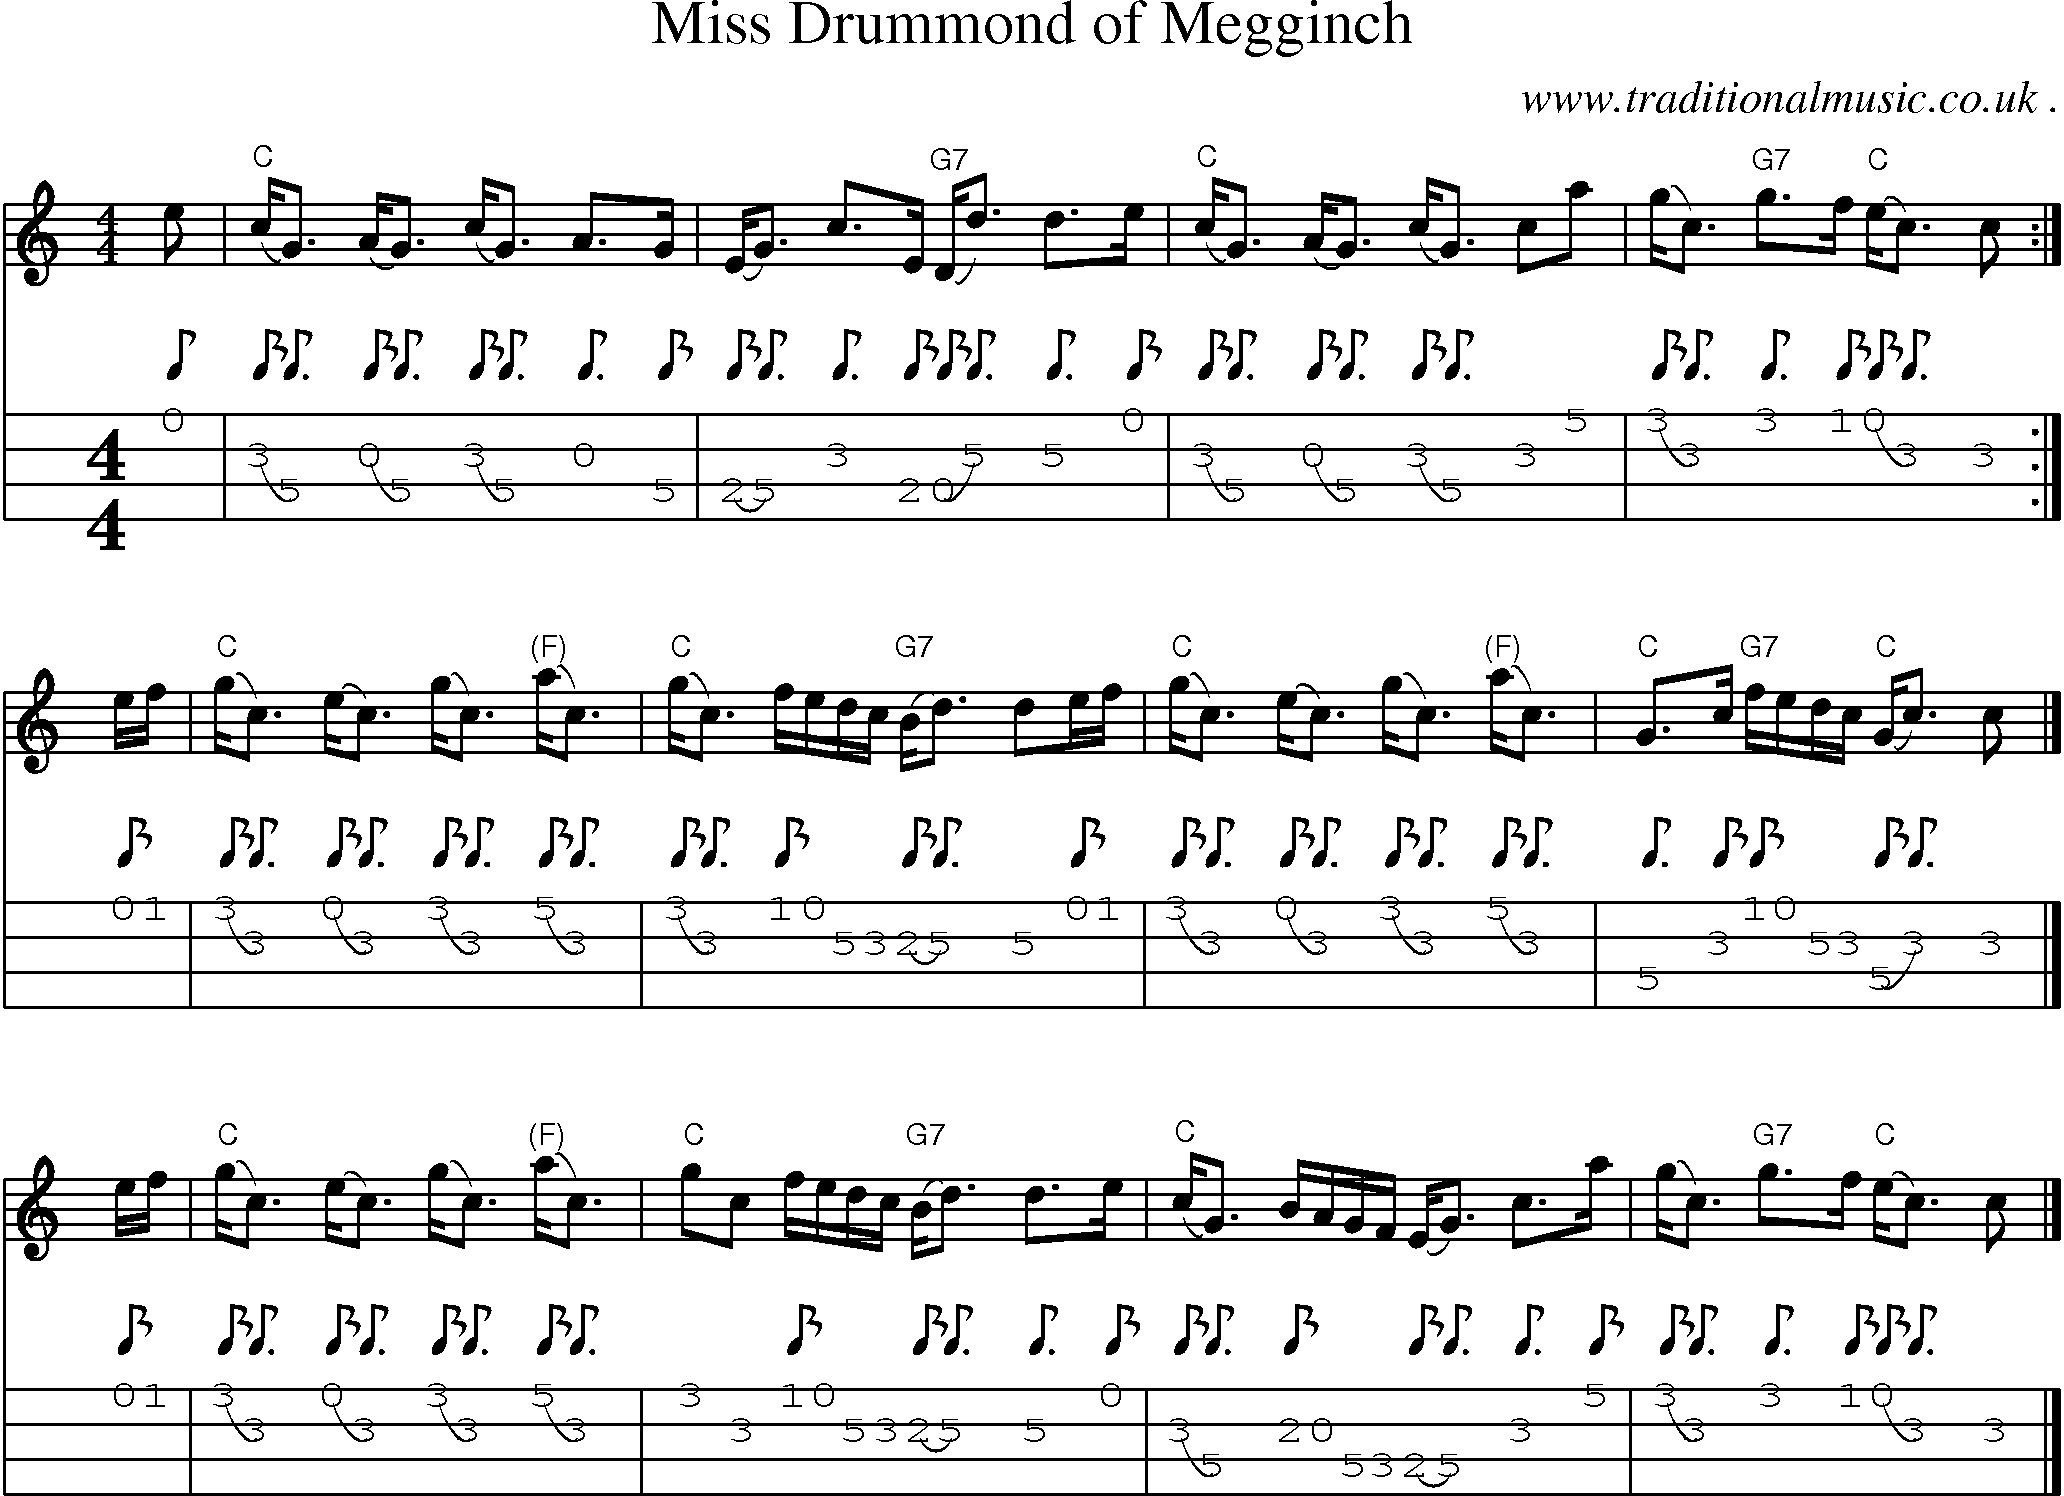 Sheet-music  score, Chords and Mandolin Tabs for Miss Drummond Of Megginch